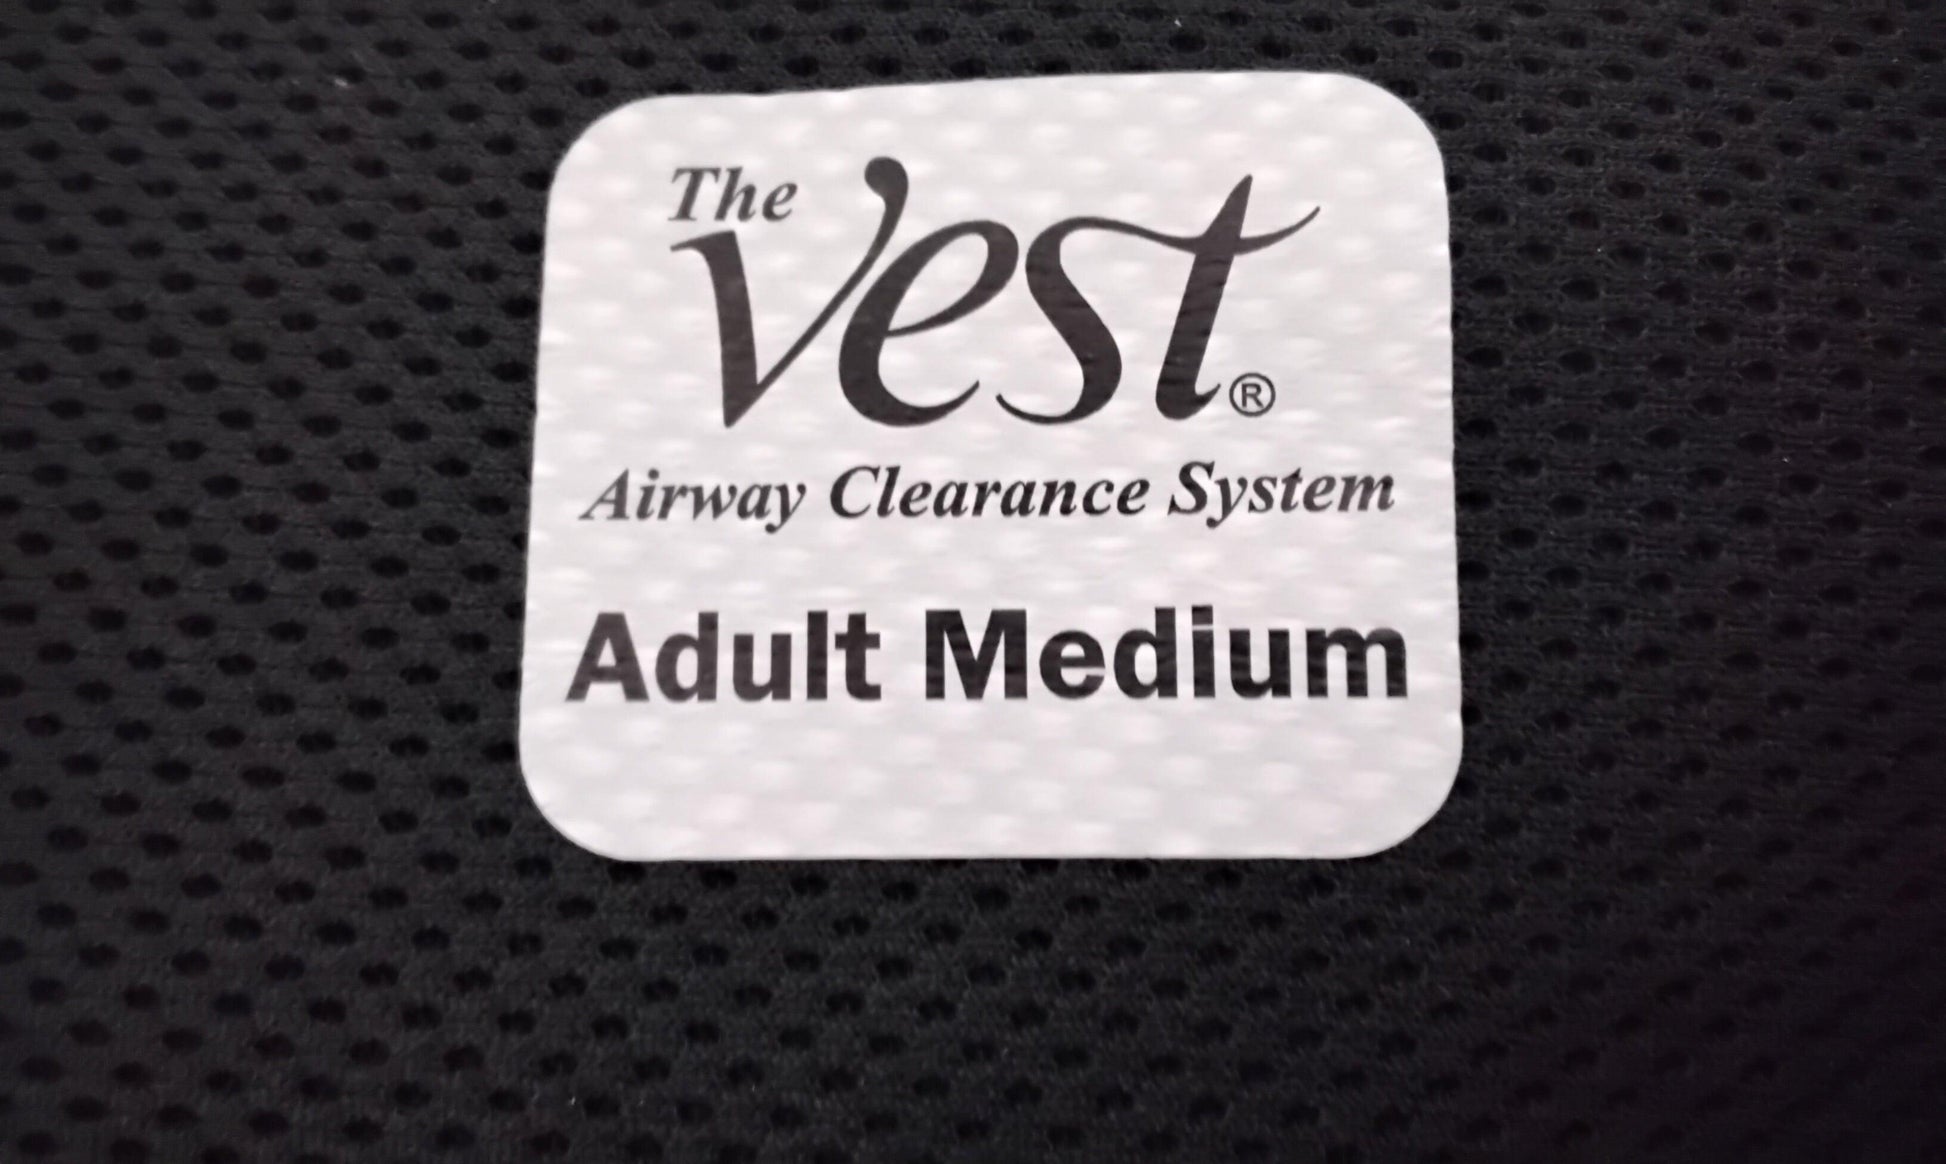 USED Adult Medium Hill-Rom The Vest Airway Clearance C3 Outer Vest Garment 167460-33 with Free Shipping & Warranty - MBR Medicals